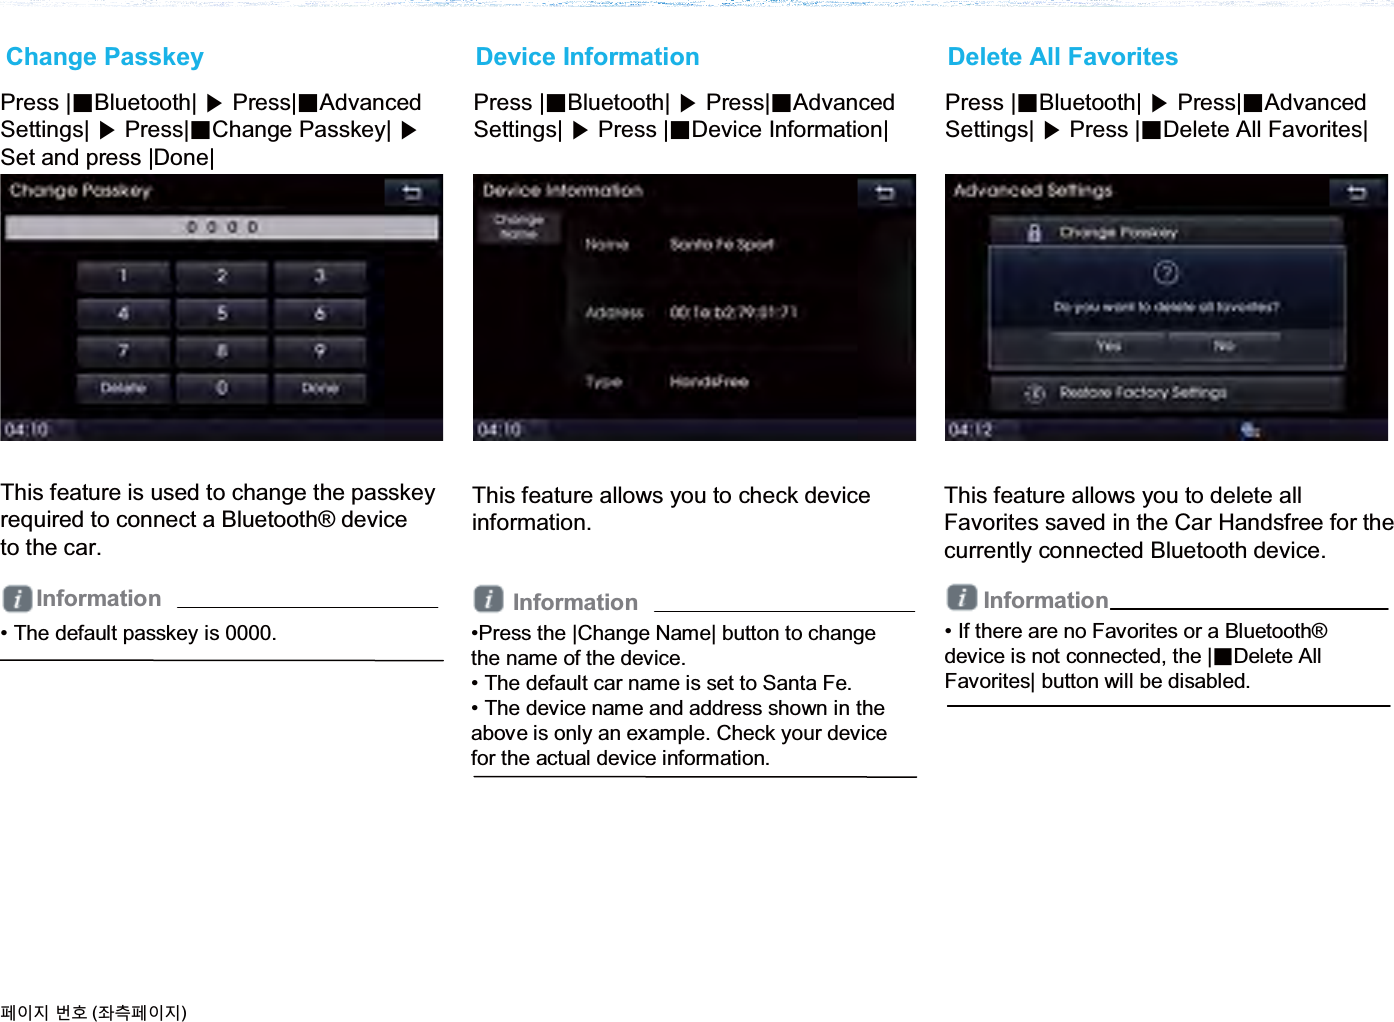 This feature is used to change the passkeyrequired to connect a Bluetooth® deviceto the car.Change PasskeyPress |ȿBluetooth| ೛Press|ȿAdvanced Settings| ೛Press |ȿDevice Information|This feature allows you to check deviceinformation.Device InformationThis feature allows you to delete all Favorites saved in the Car Handsfree for the currently connected Bluetooth device.Delete All FavoritesPress |ȿBluetooth| ೛Press|ȿAdvanced Settings| ೛Press|ȿChange Passkey| ೛Set and press |Done|Press |ȿBluetooth| ೛Press|ȿAdvanced Settings| ೛Press |ȿDelete All Favorites|•Press the |Change Name| button to change the name of the device.• The default car name is set to Santa Fe.• The device name and address shown in the above is only an example. Check your device for the actual device information.• The default passkey is 0000.૓ࢇए ء୎ (্ࣛ૓ࢇए)• If there are no Favorites or a Bluetooth®device is not connected, the |ȼDelete All Favorites| button will be disabled.InformationInformation Information